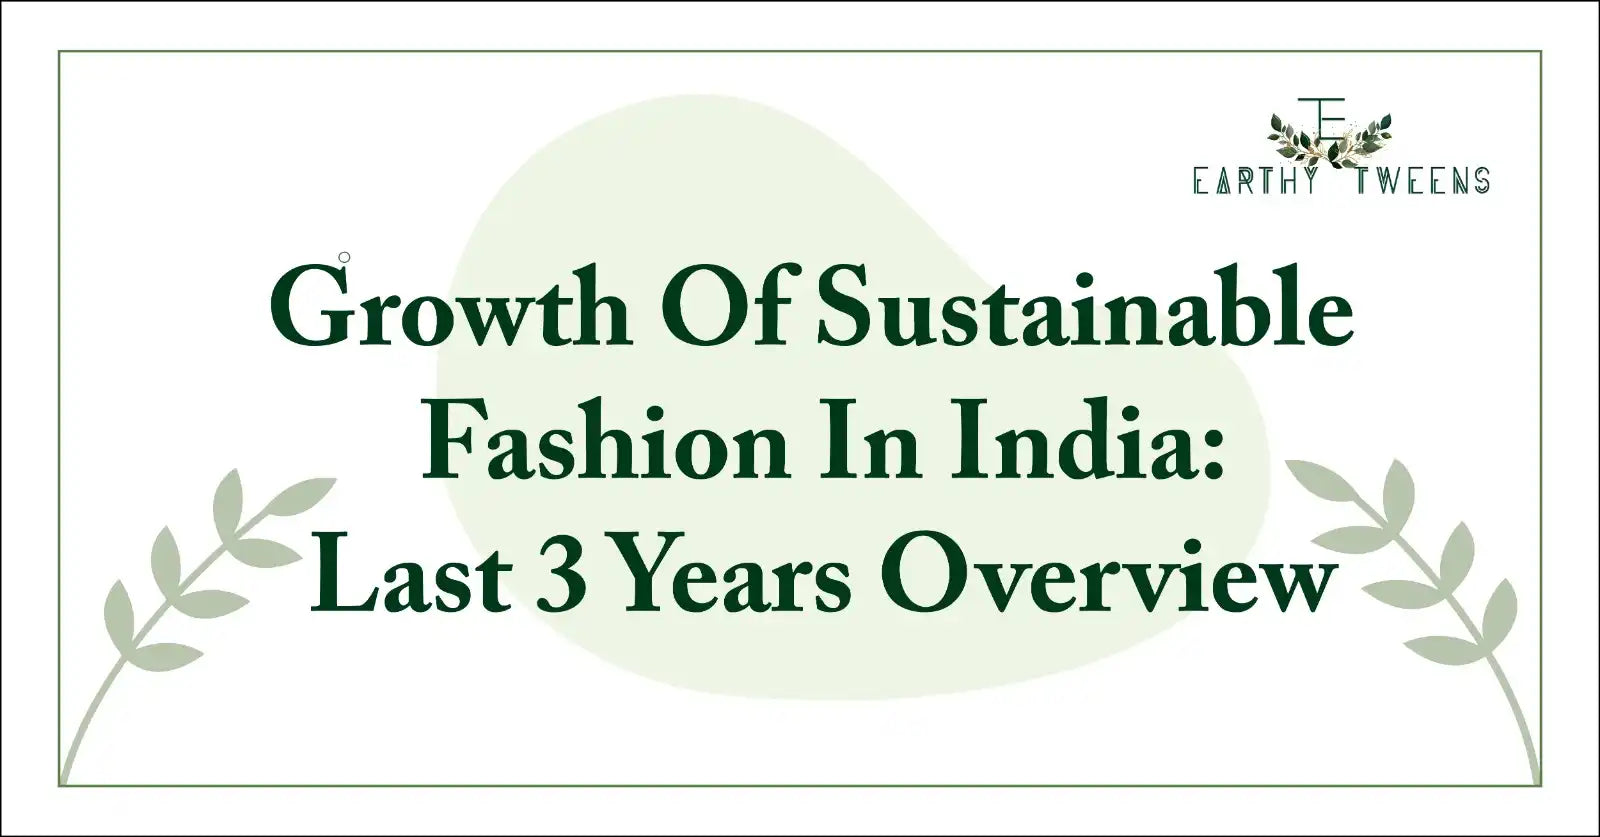 Growth of Sustainable Fashion In India: Last 3 Years Overview